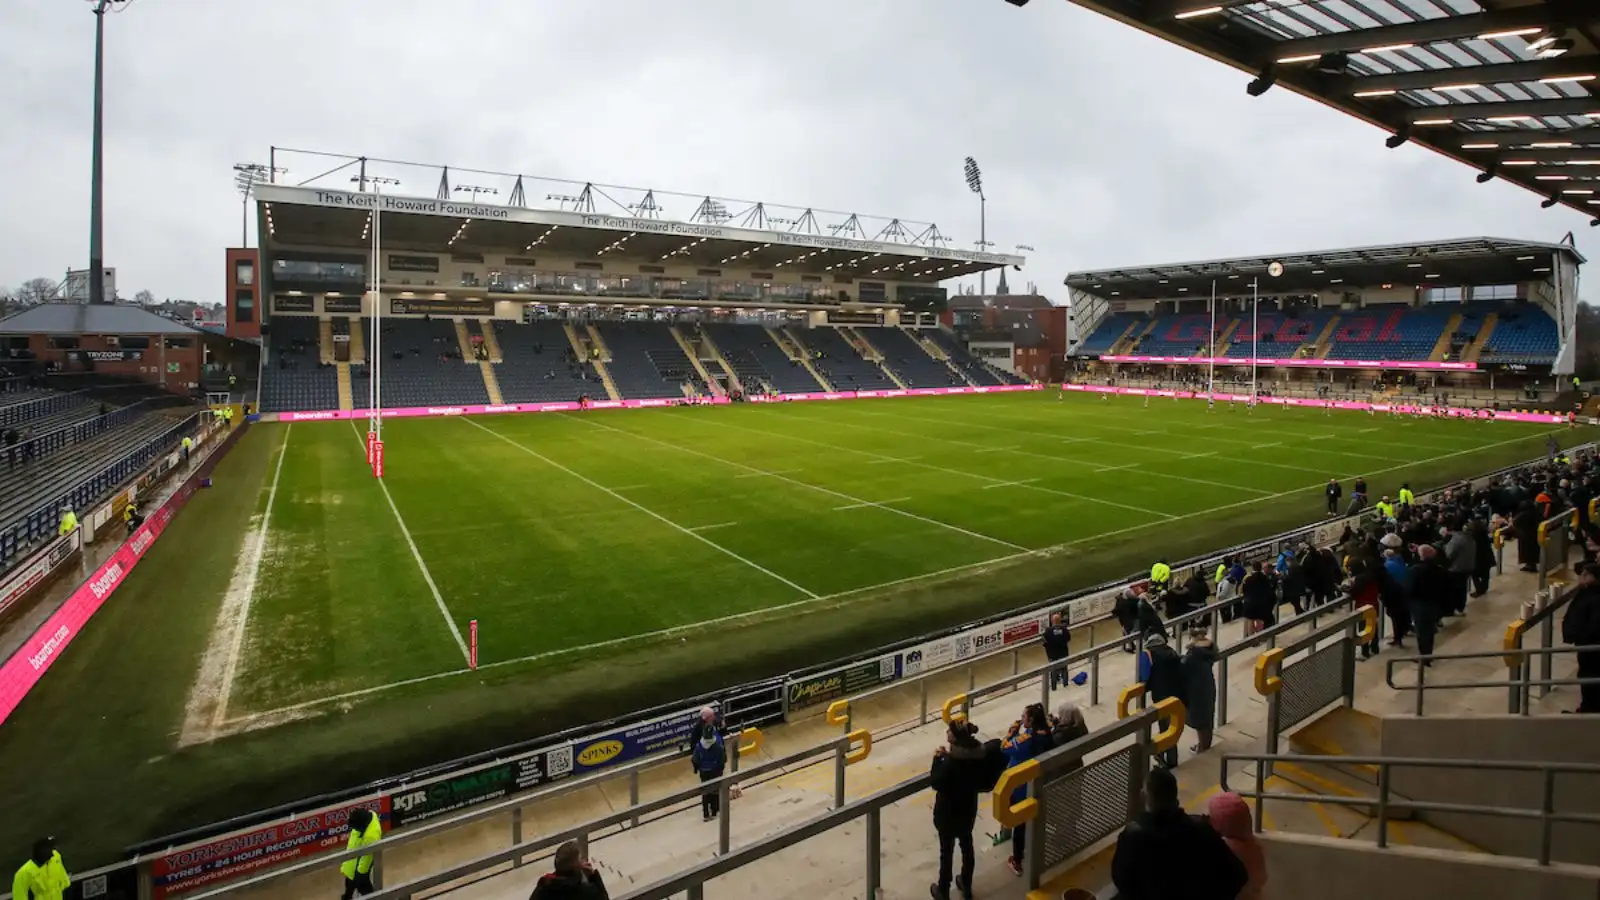 International double-header confirmed for Headingley Stadium later this year